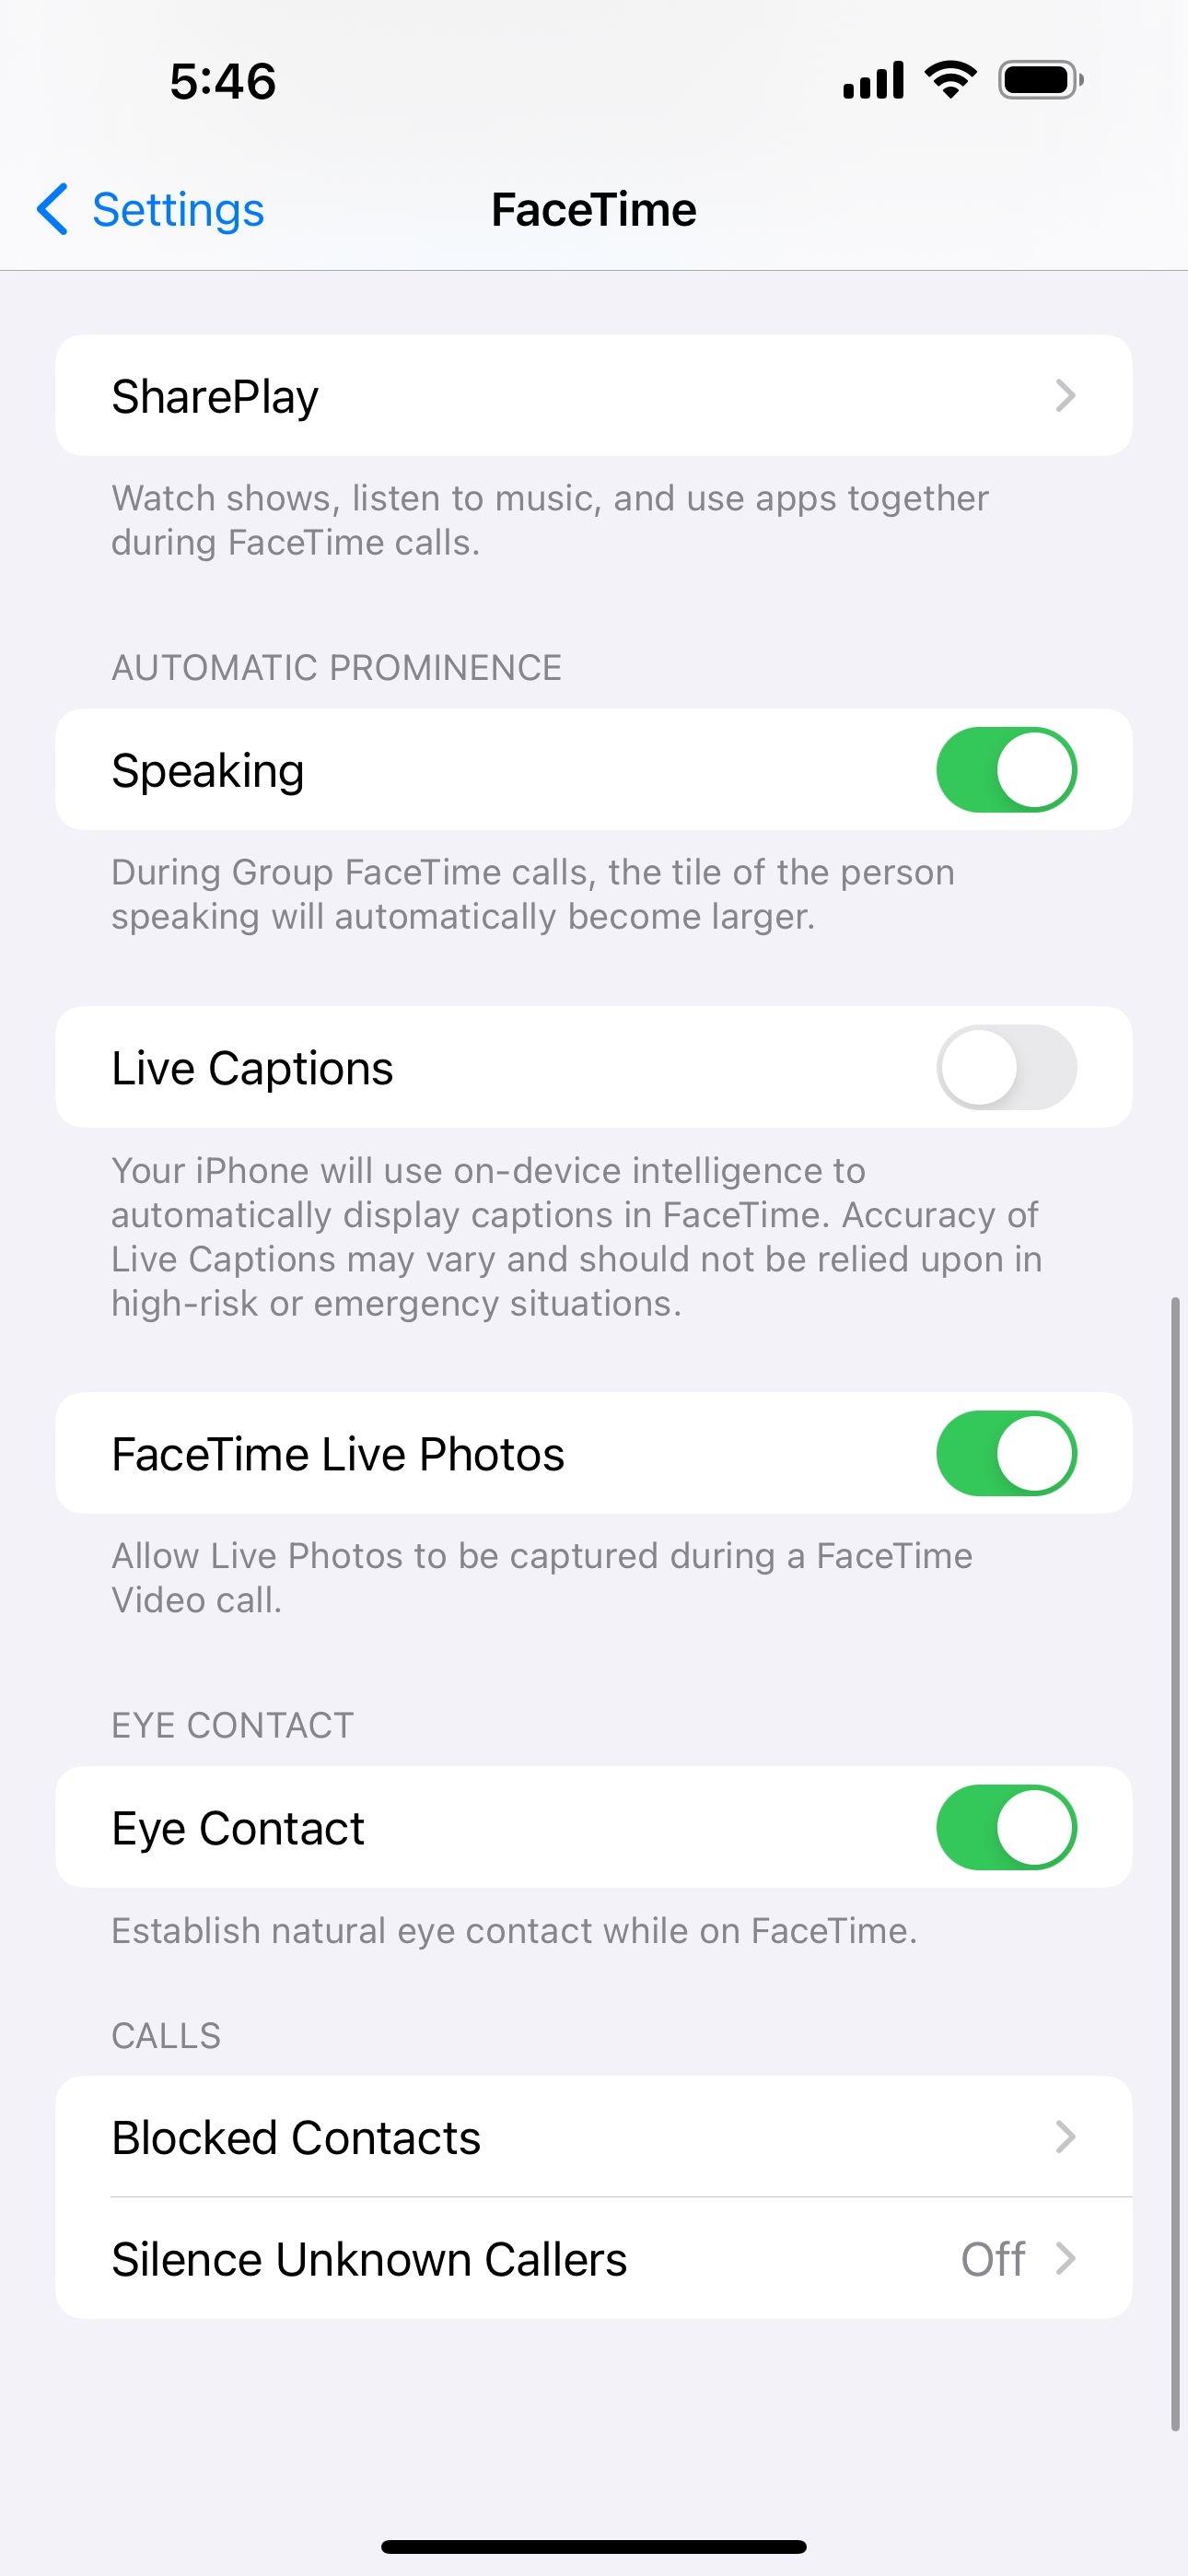 FaceTime Live Photos toggle enabled